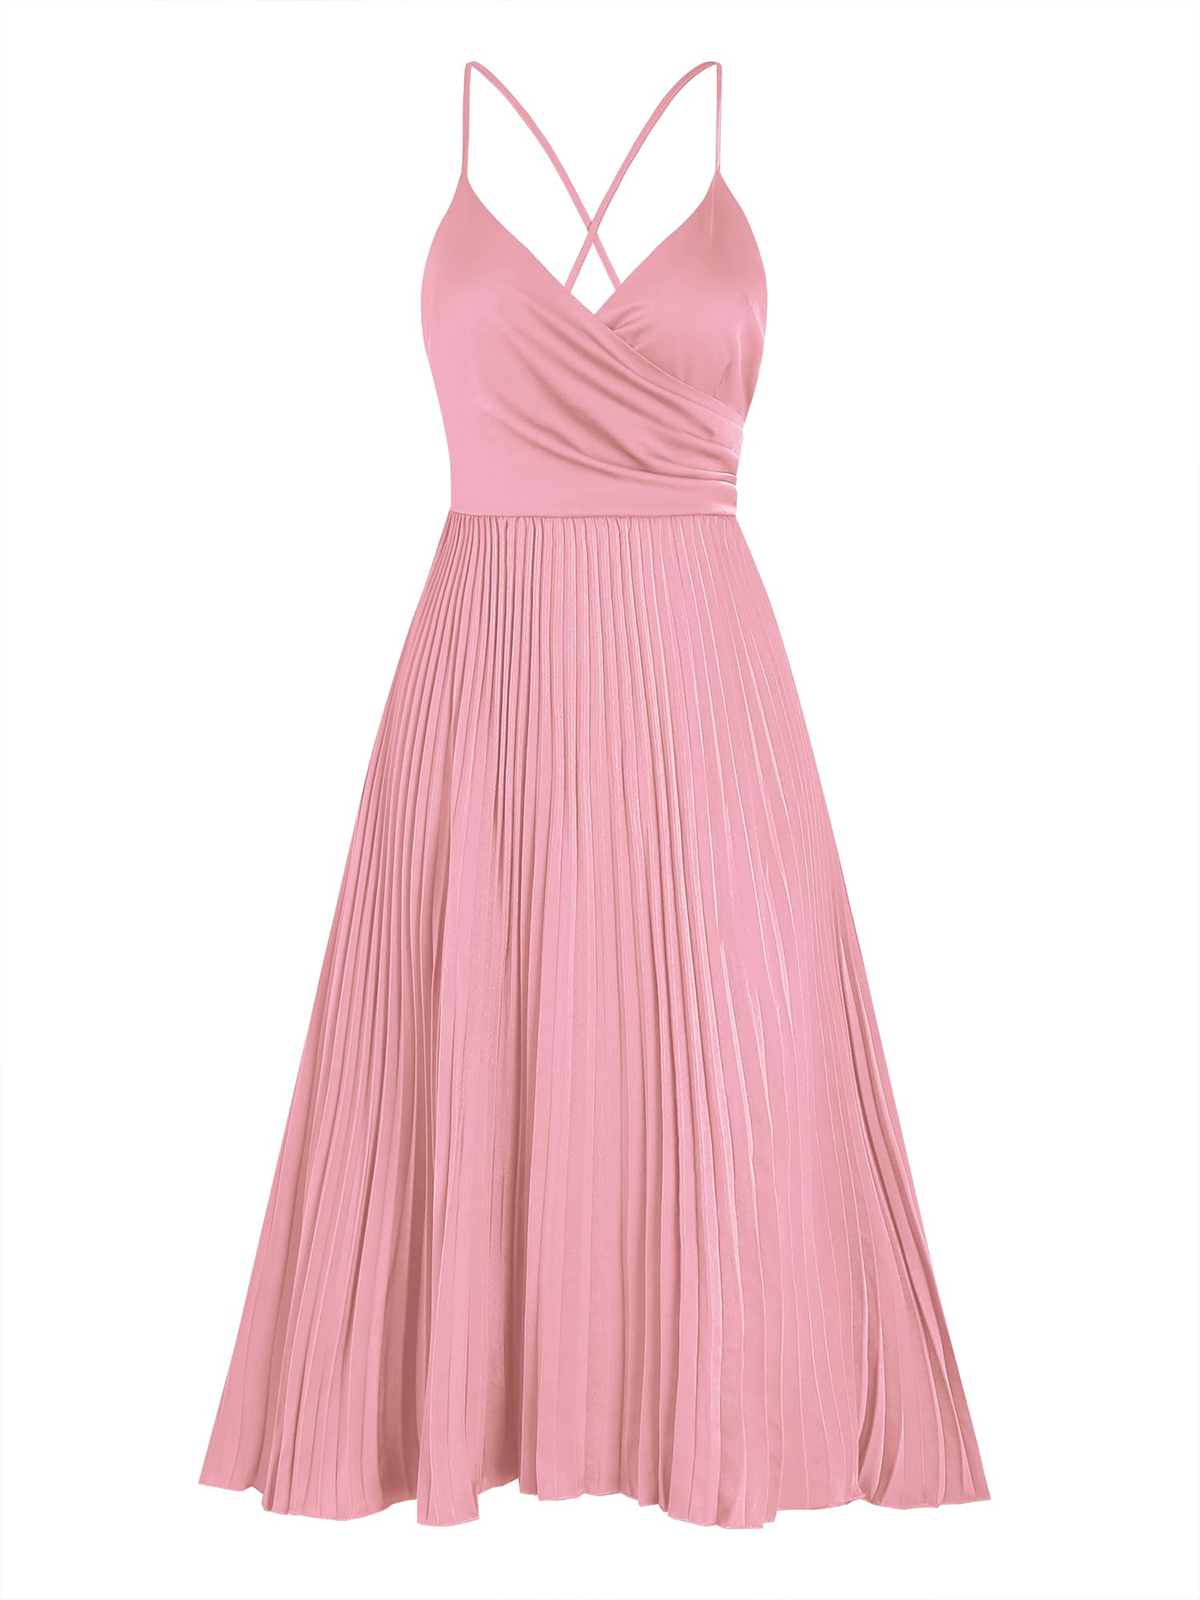 Satin-Sexy-Gown-Dress-Pink-3